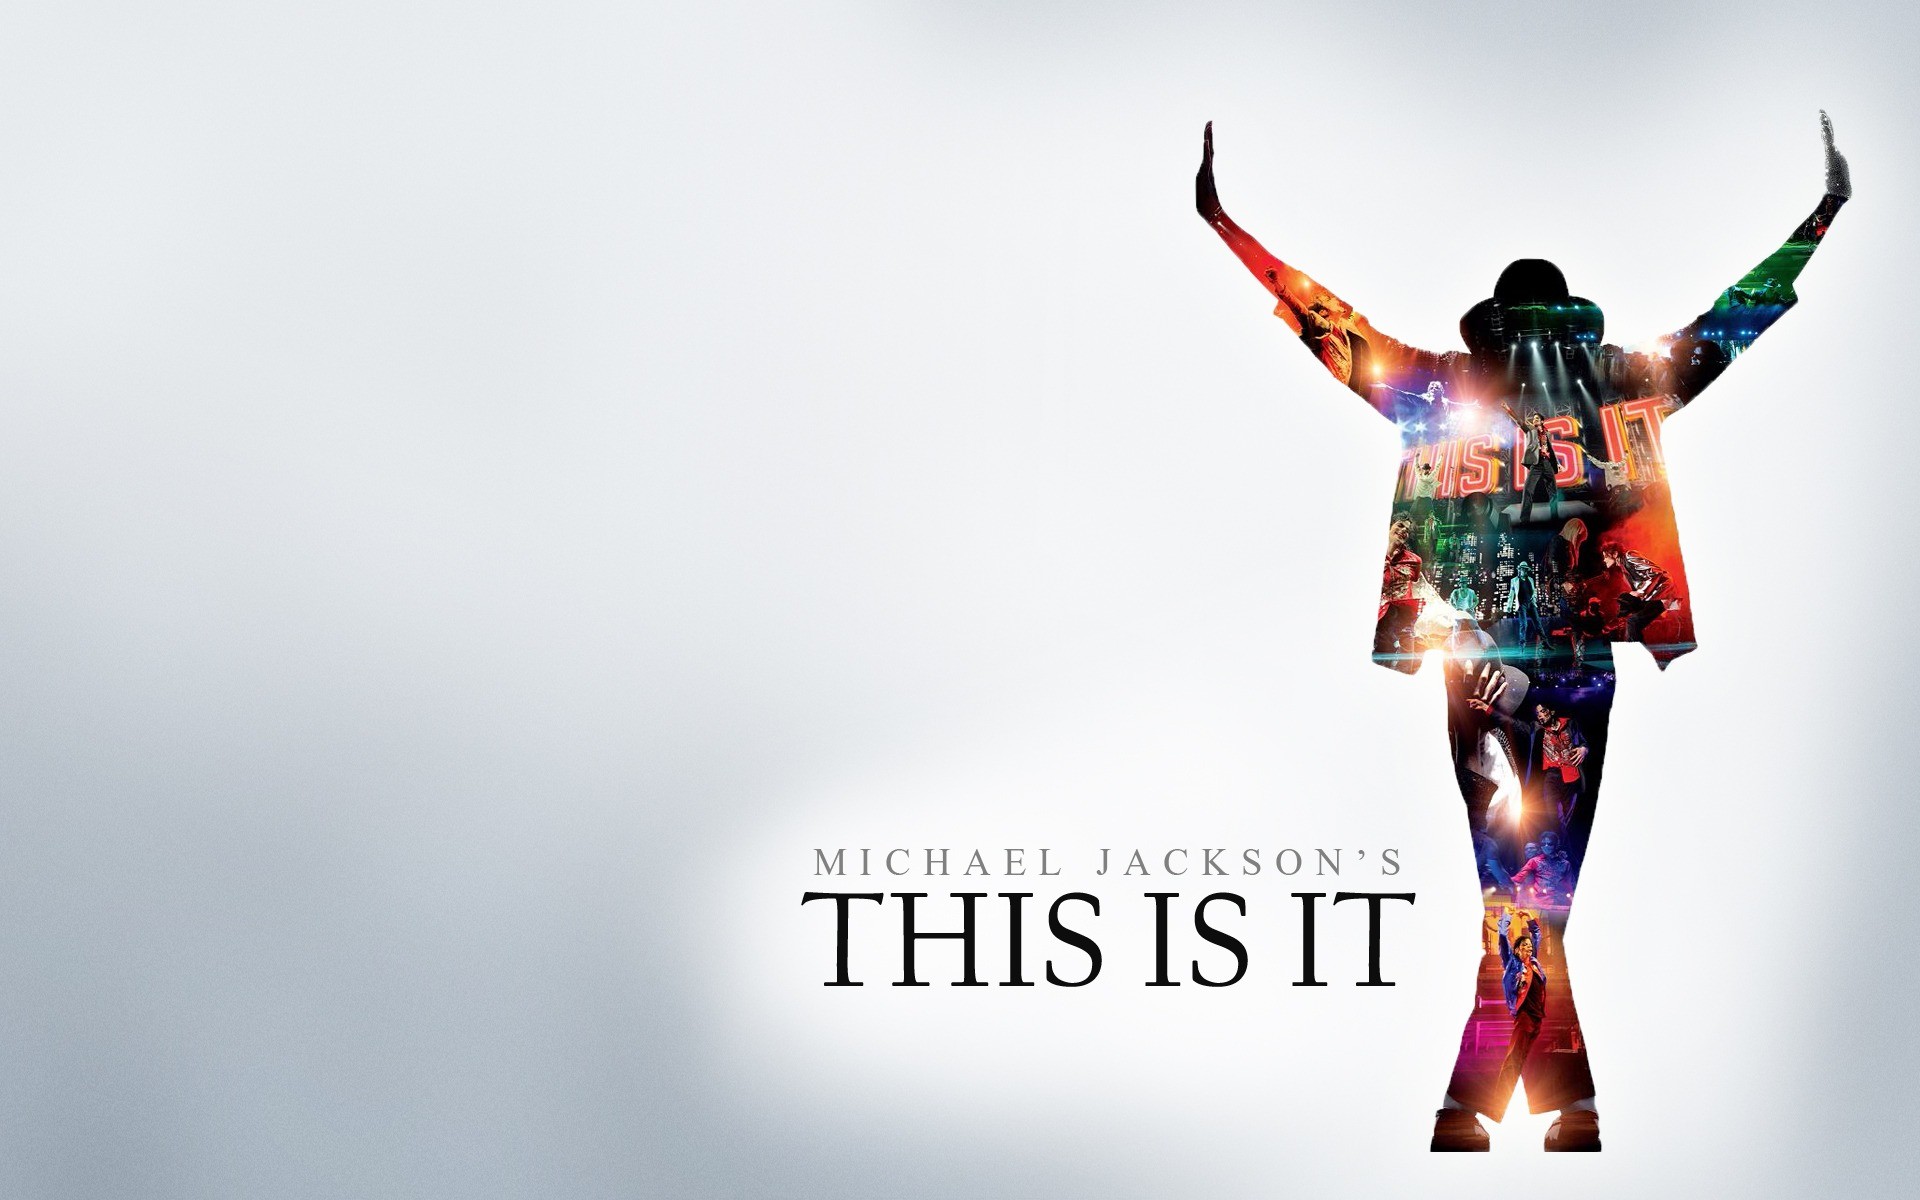 Michael Jackson Wallpapers For Free Download About 50 Wallpapers 1920x1200